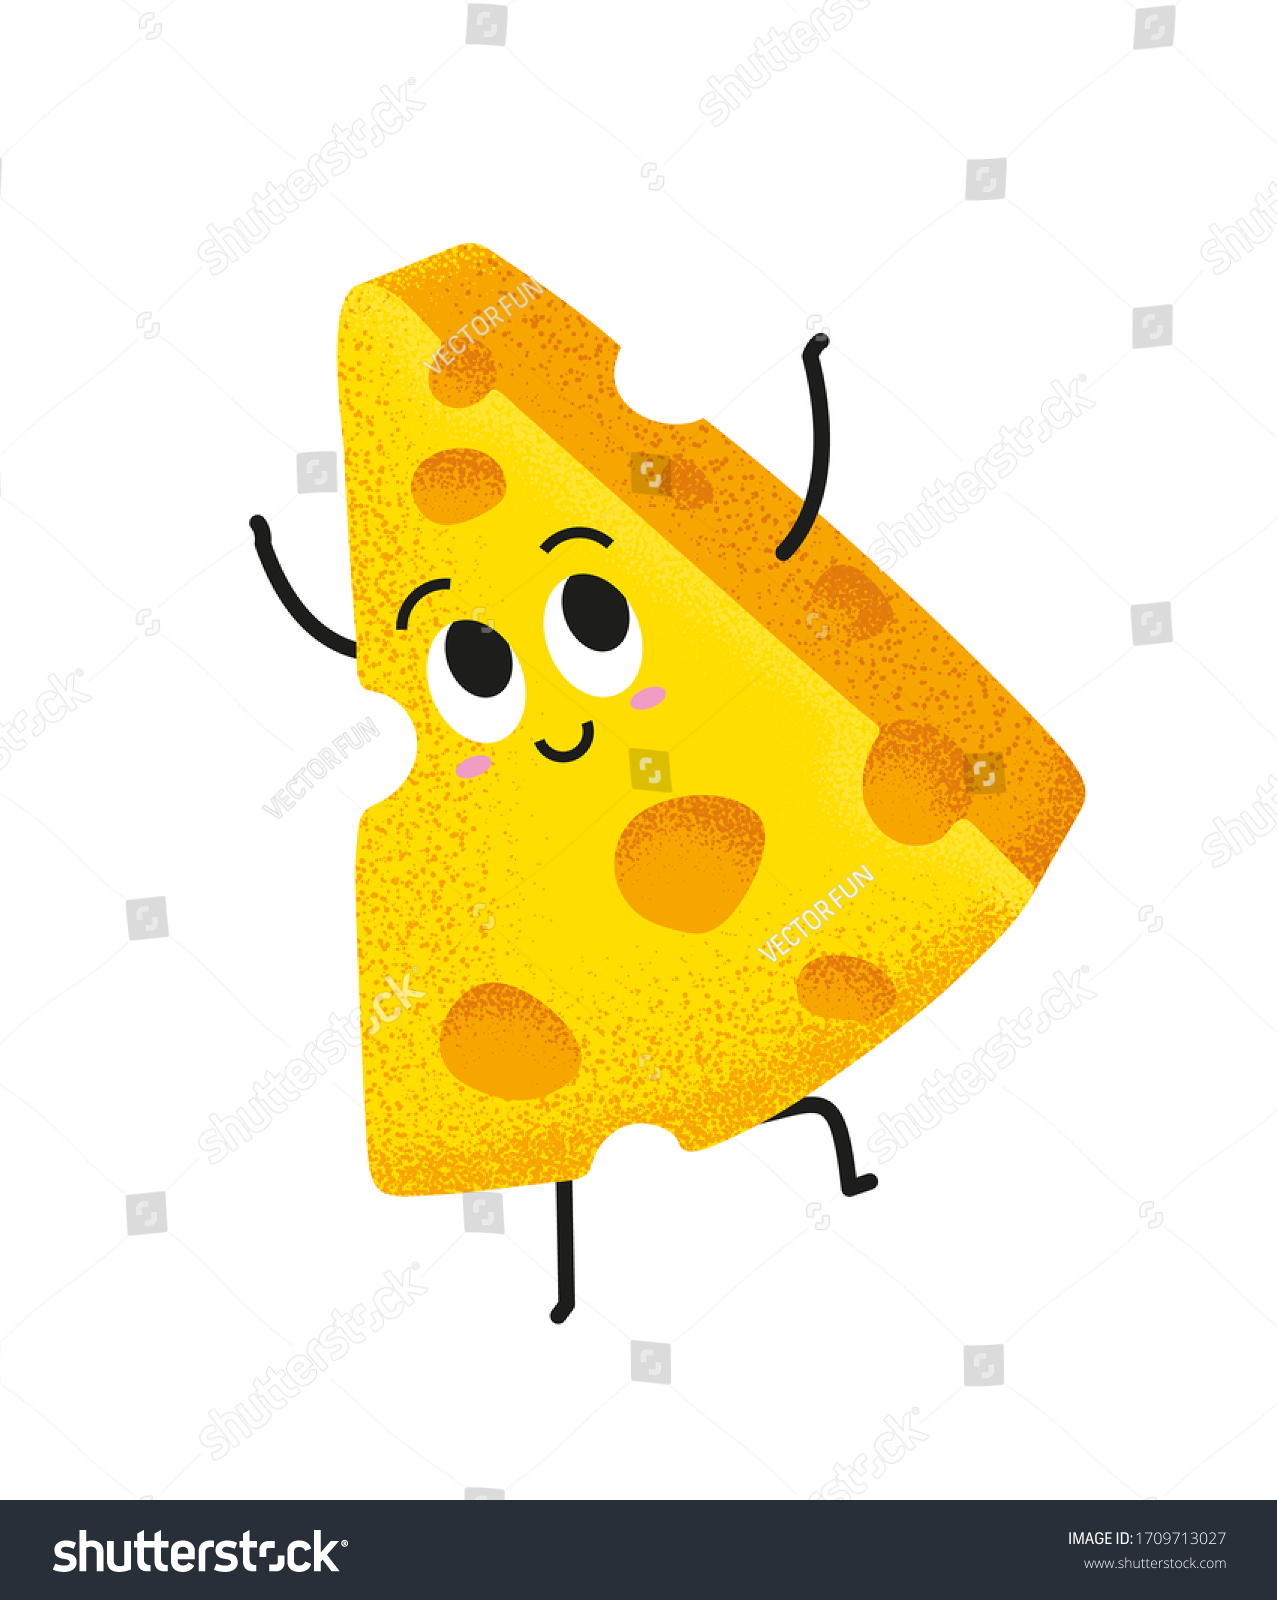 SVG of Kawaii cheese character vector illustration. Funny happy cute smiling cheese. Flat cartoon character illustration icon. Happy funny asian character for children's restaurant menu, Fast Food Banner svg